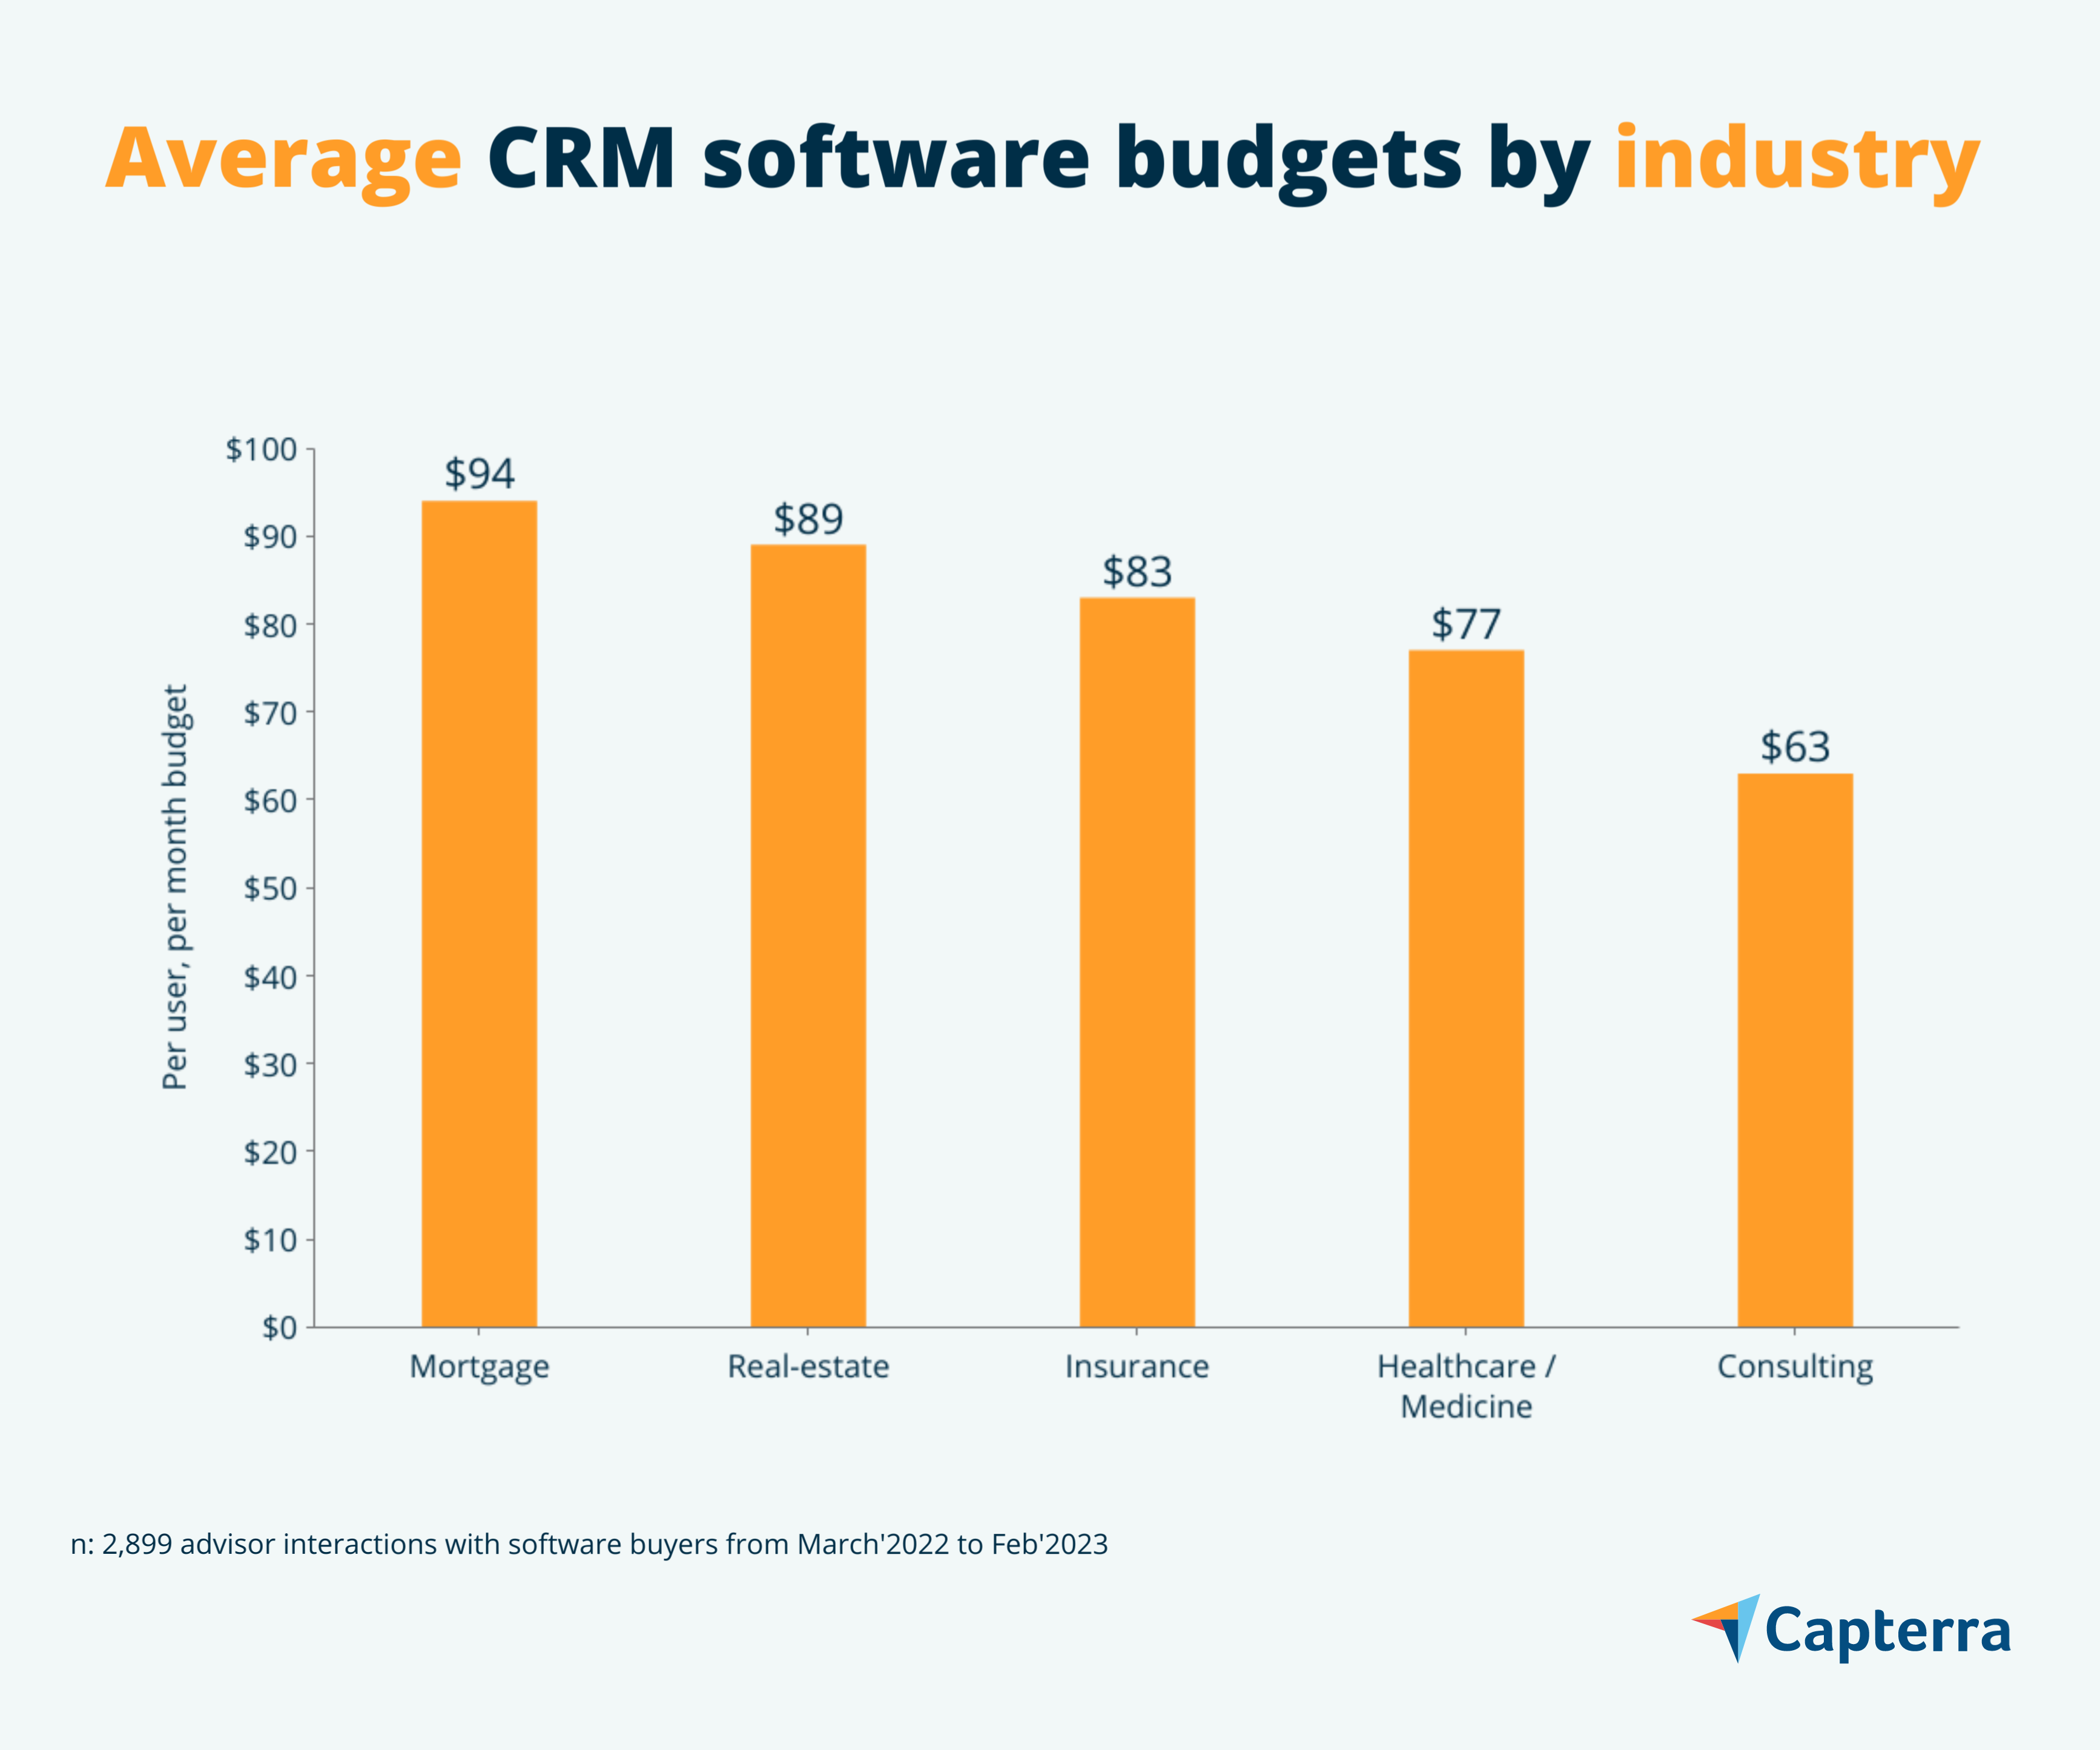 Average CRM software budget by industry